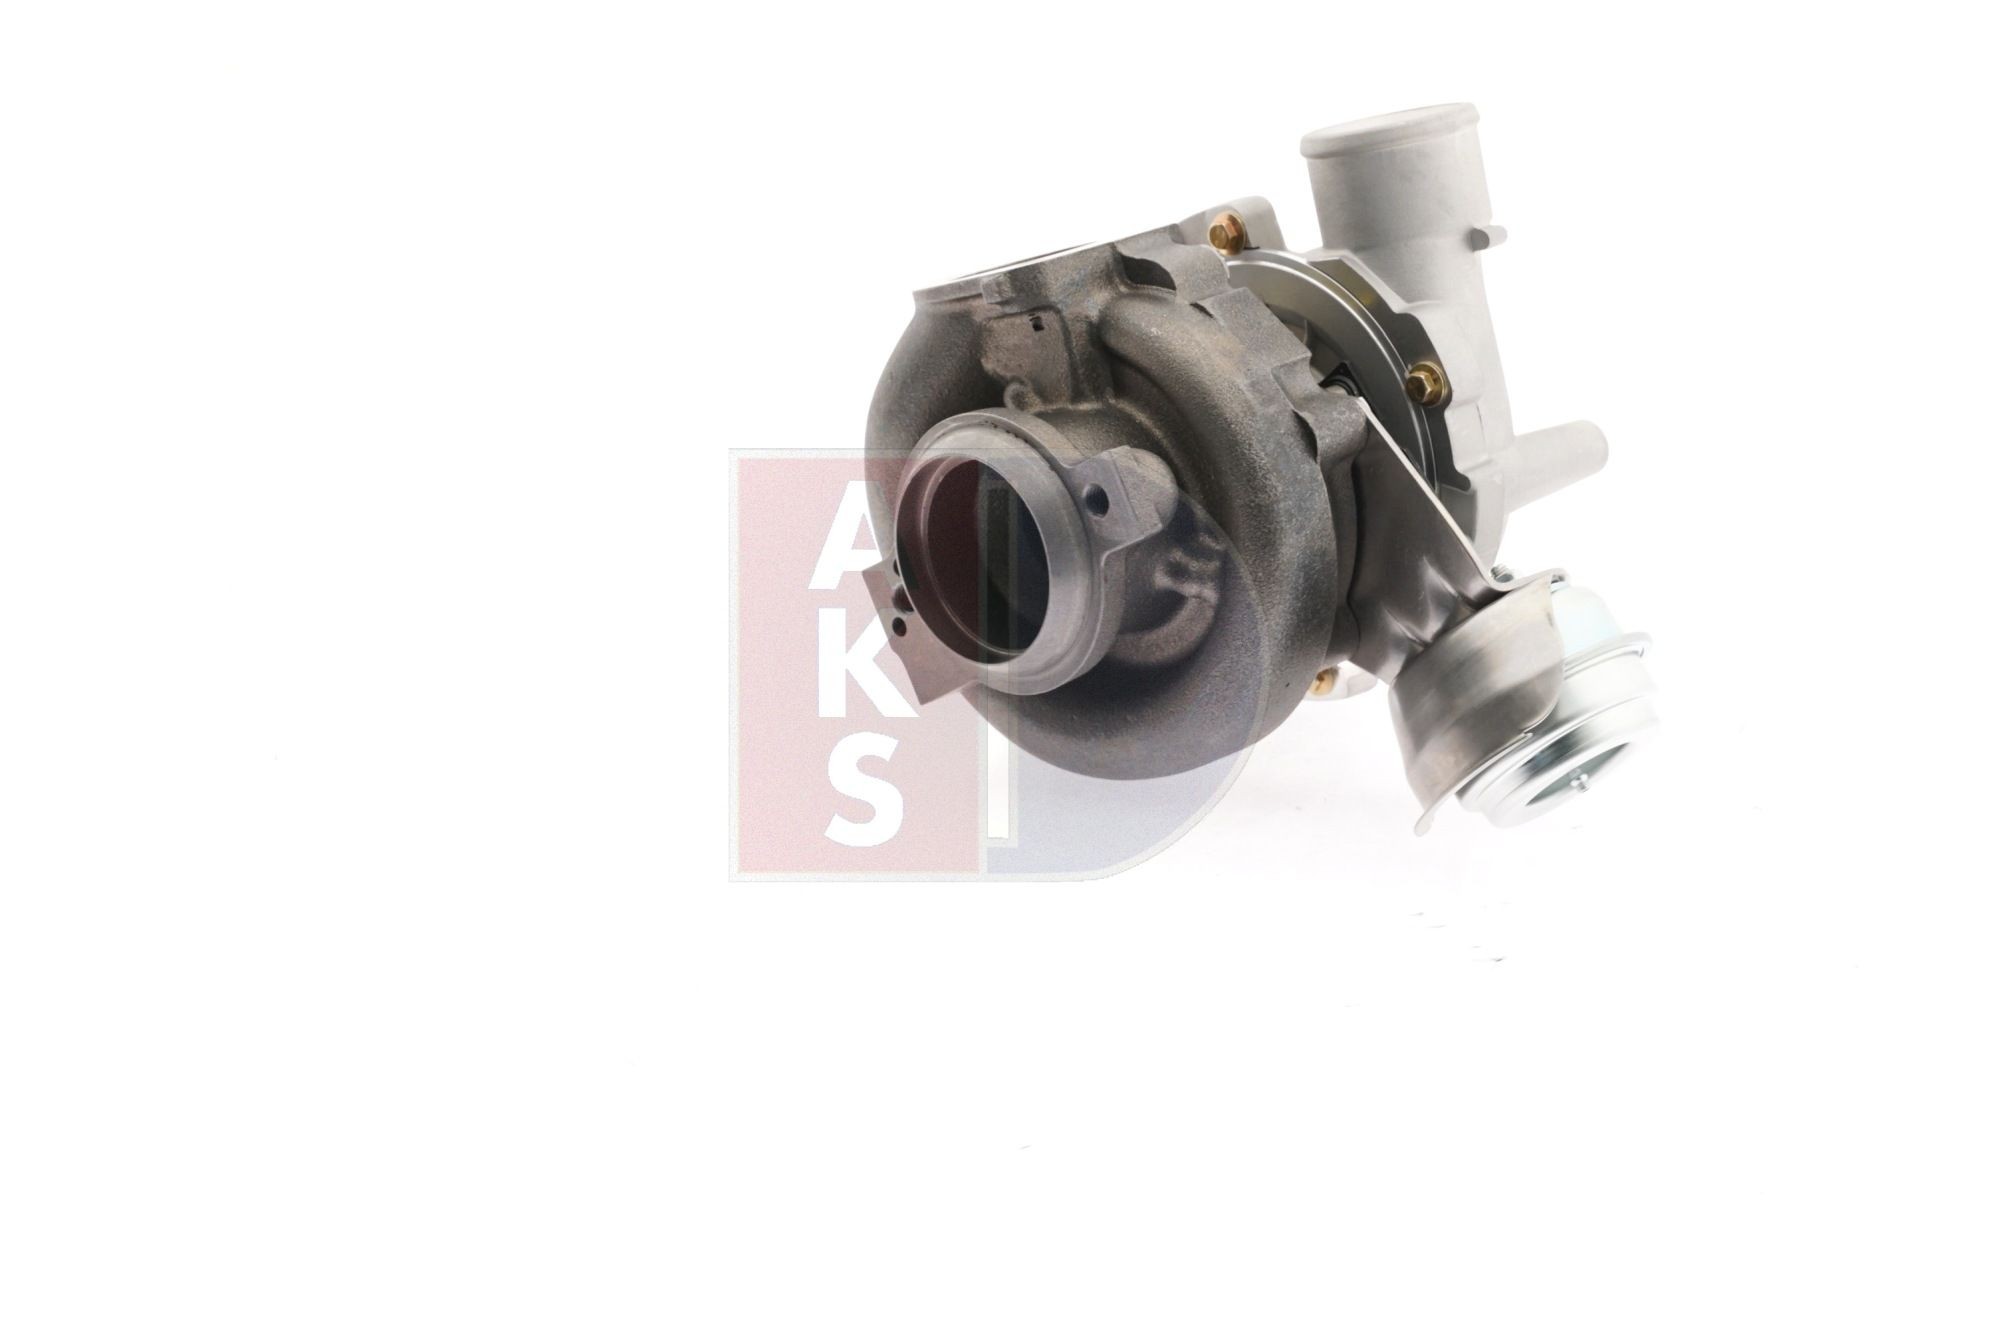 055013N Turbocharger 055013N AKS DASIS Exhaust Turbocharger, with gaskets/seals